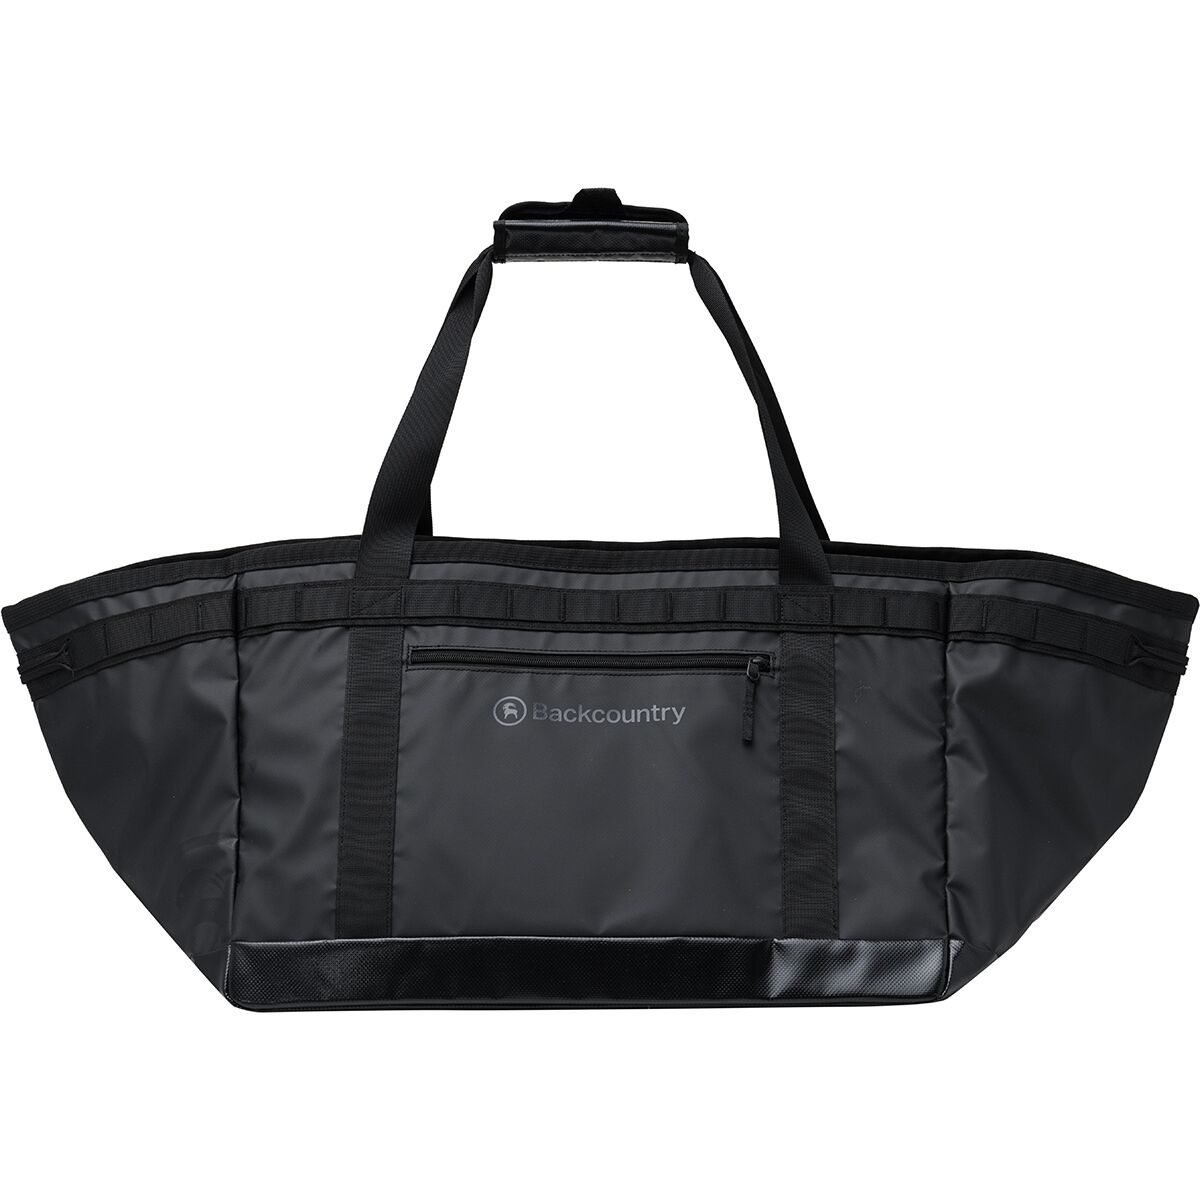 Backcountry 70L Gear Tote